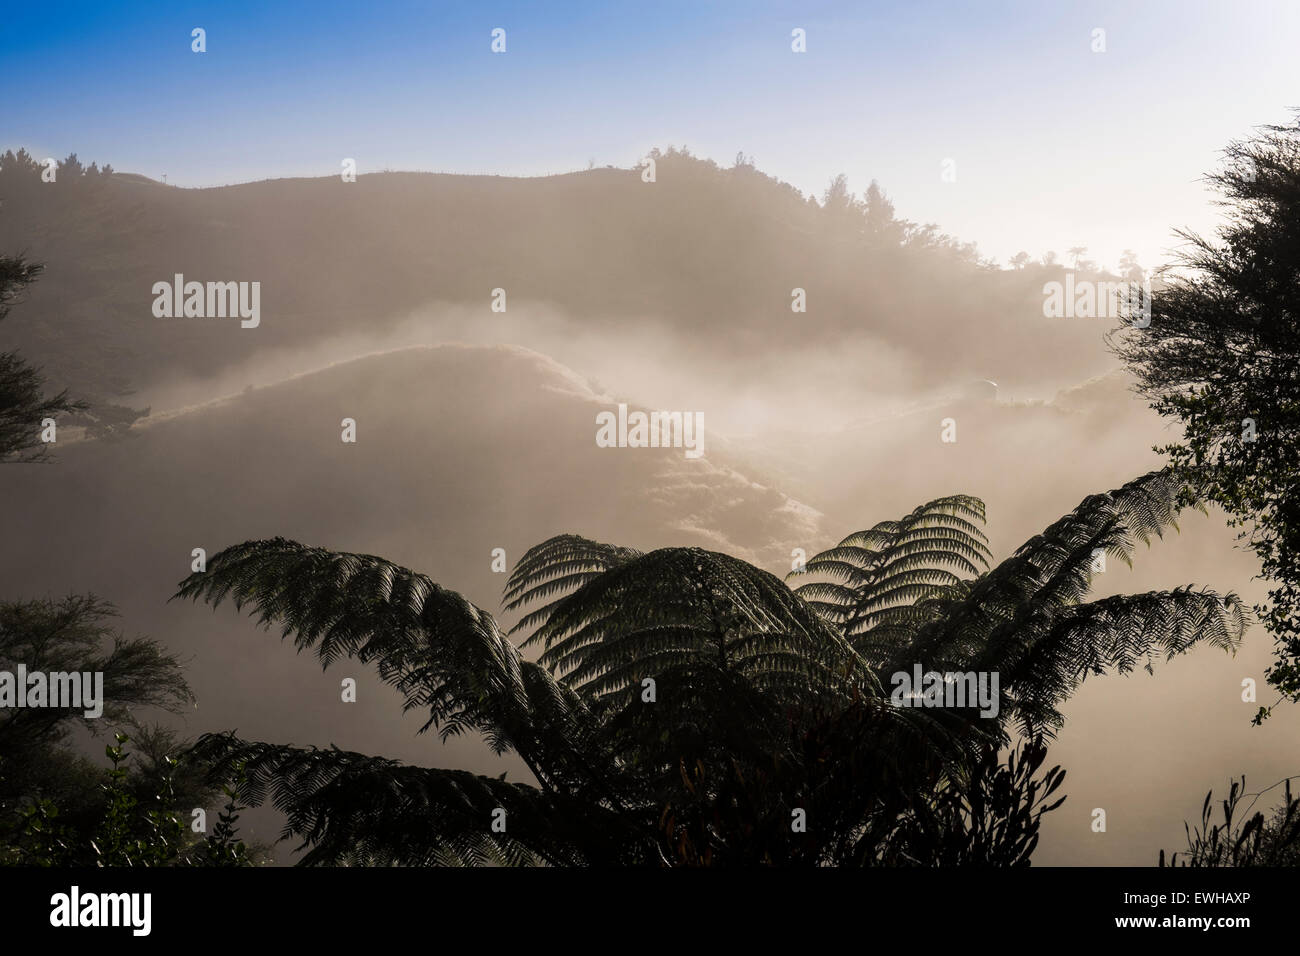 Fern trees with dew and a misty background in the hills outside Waitomo, New Zealand. Stock Photo